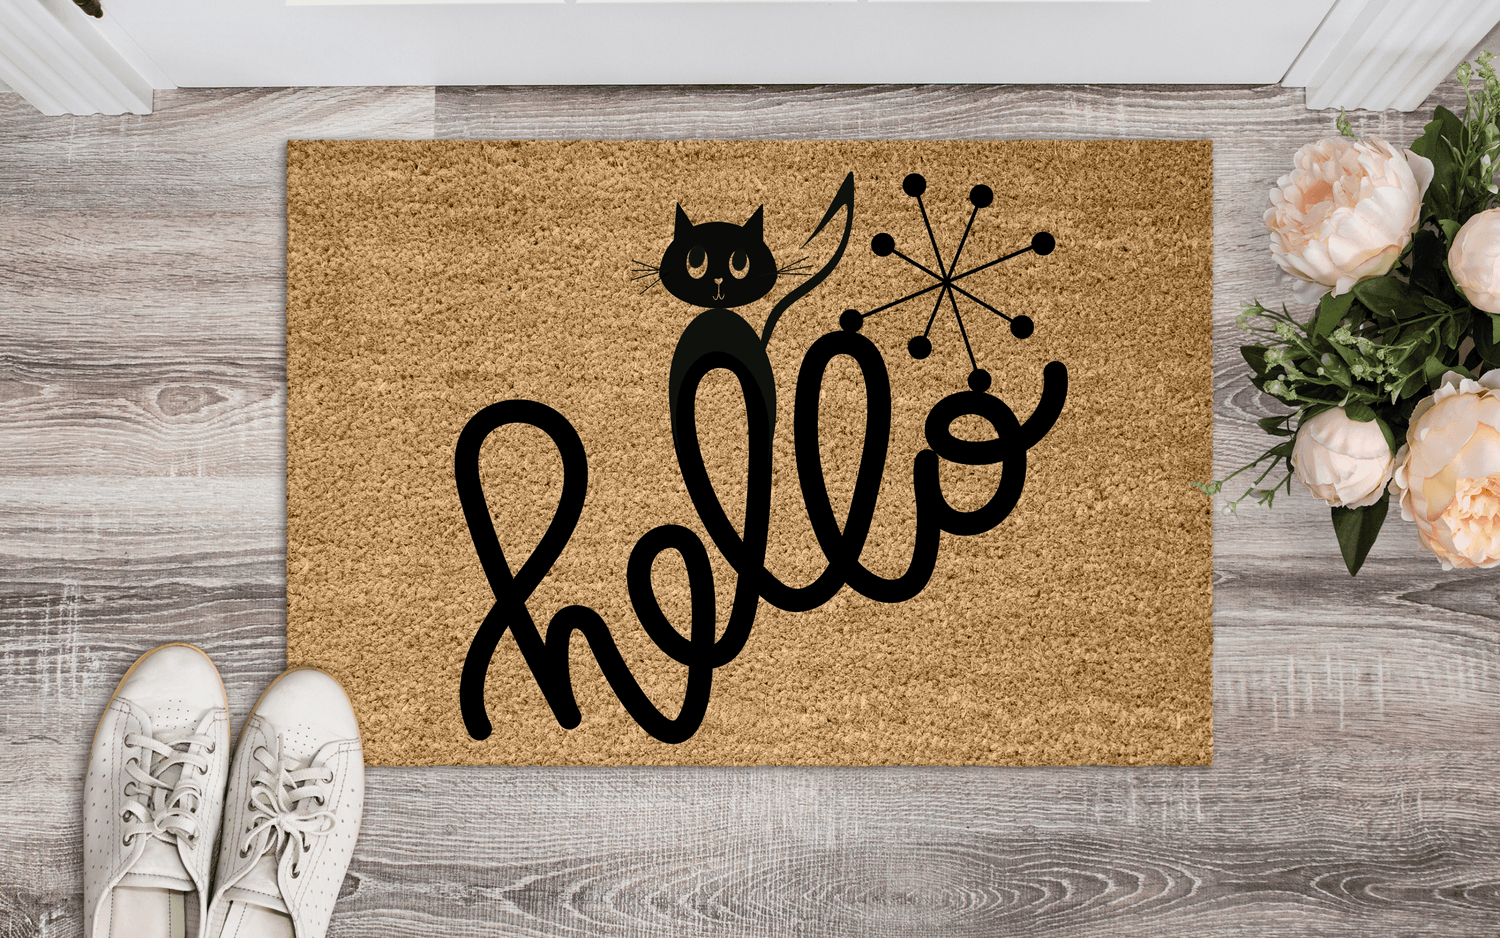 Atomic Cat, Kitschy Cute, Quirky, Summer Hello, Housewarming Mid Century Mod Welcome Mat Home Goods